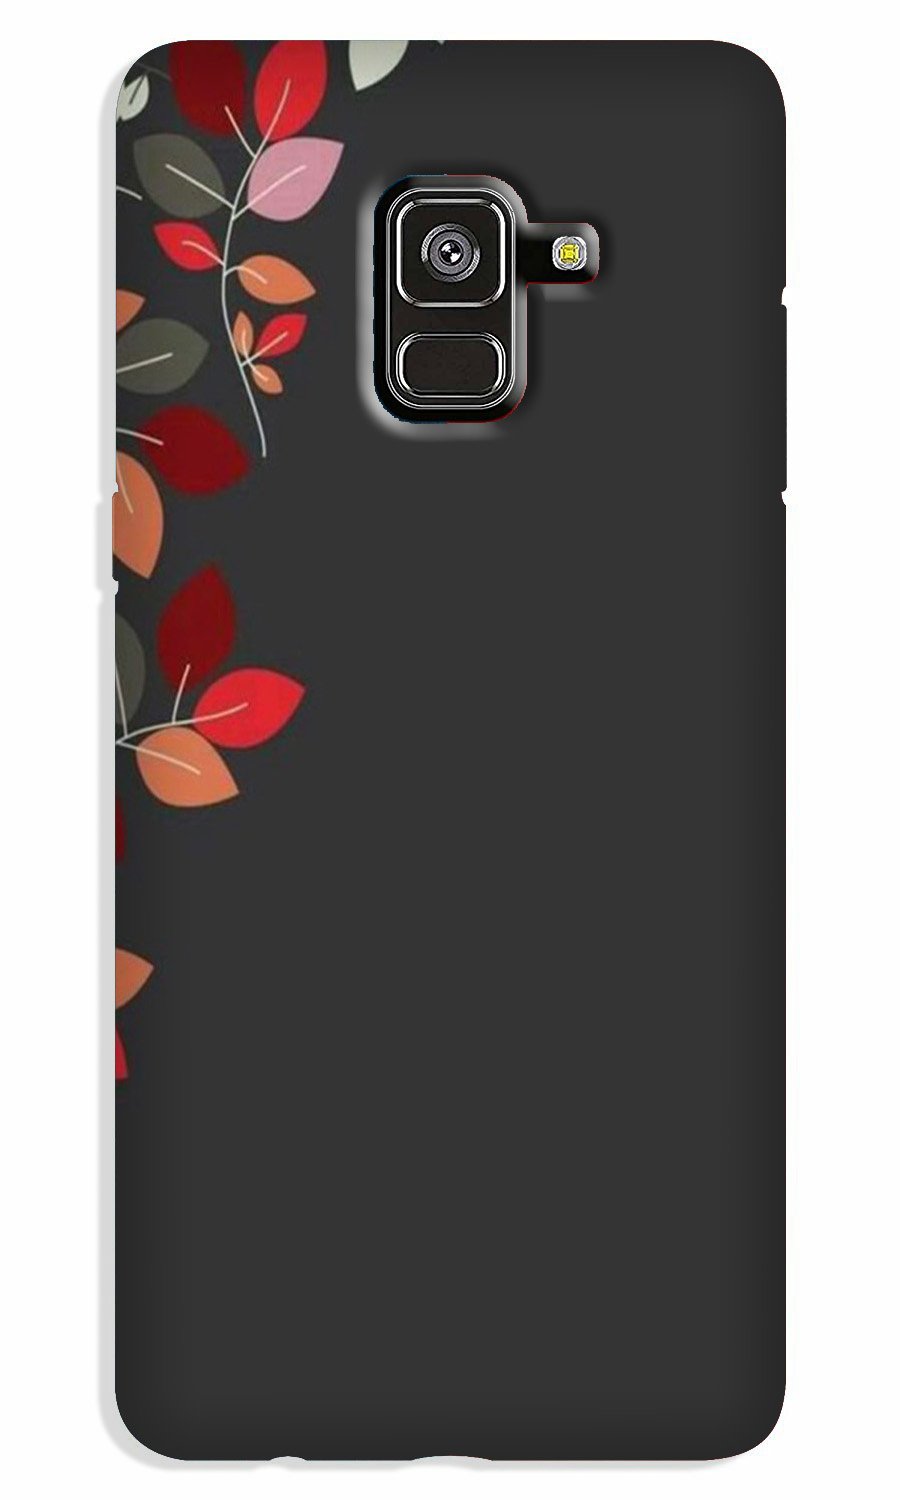 Grey Background Case for Galaxy A8 Plus